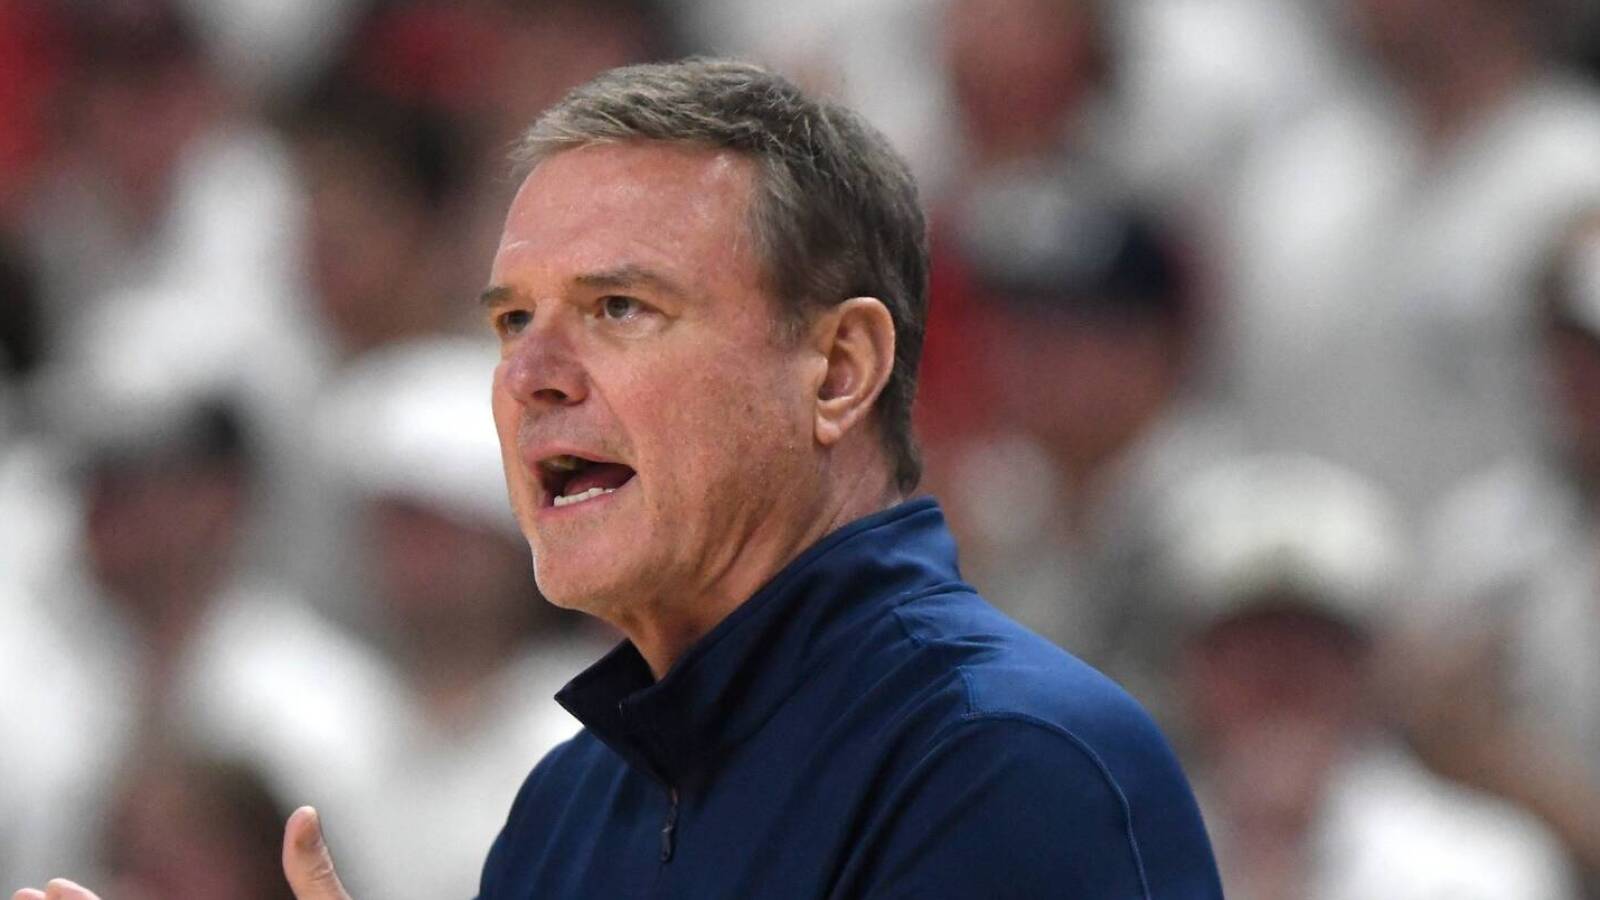 Bill Self’s Rare Ejection After 25 Years: Impact on Kansas and Big 12 Standings